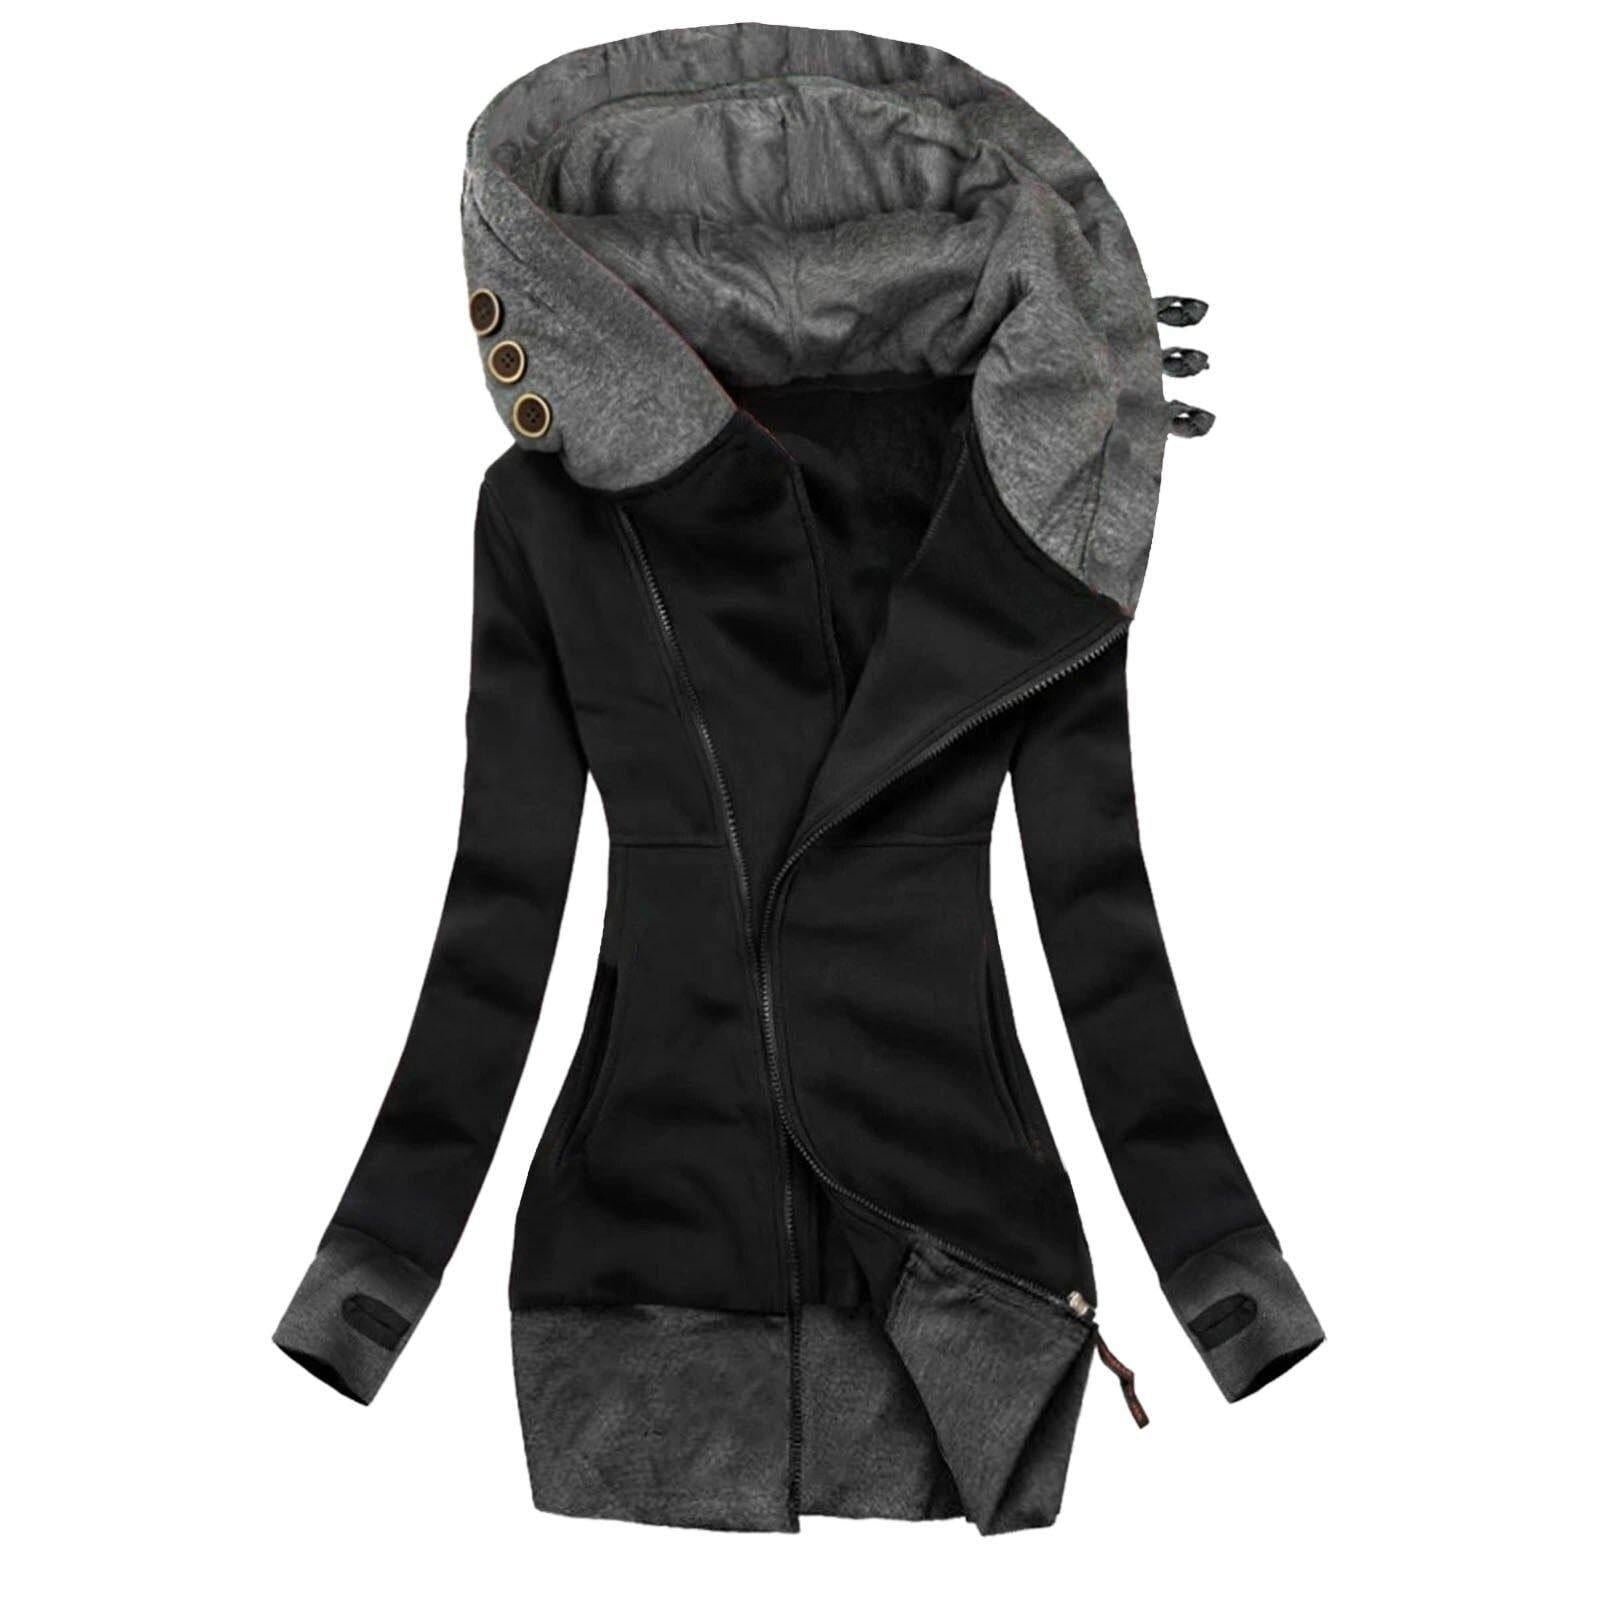 Women's Solid Color Hooded Fashion Jacket - For Women USA